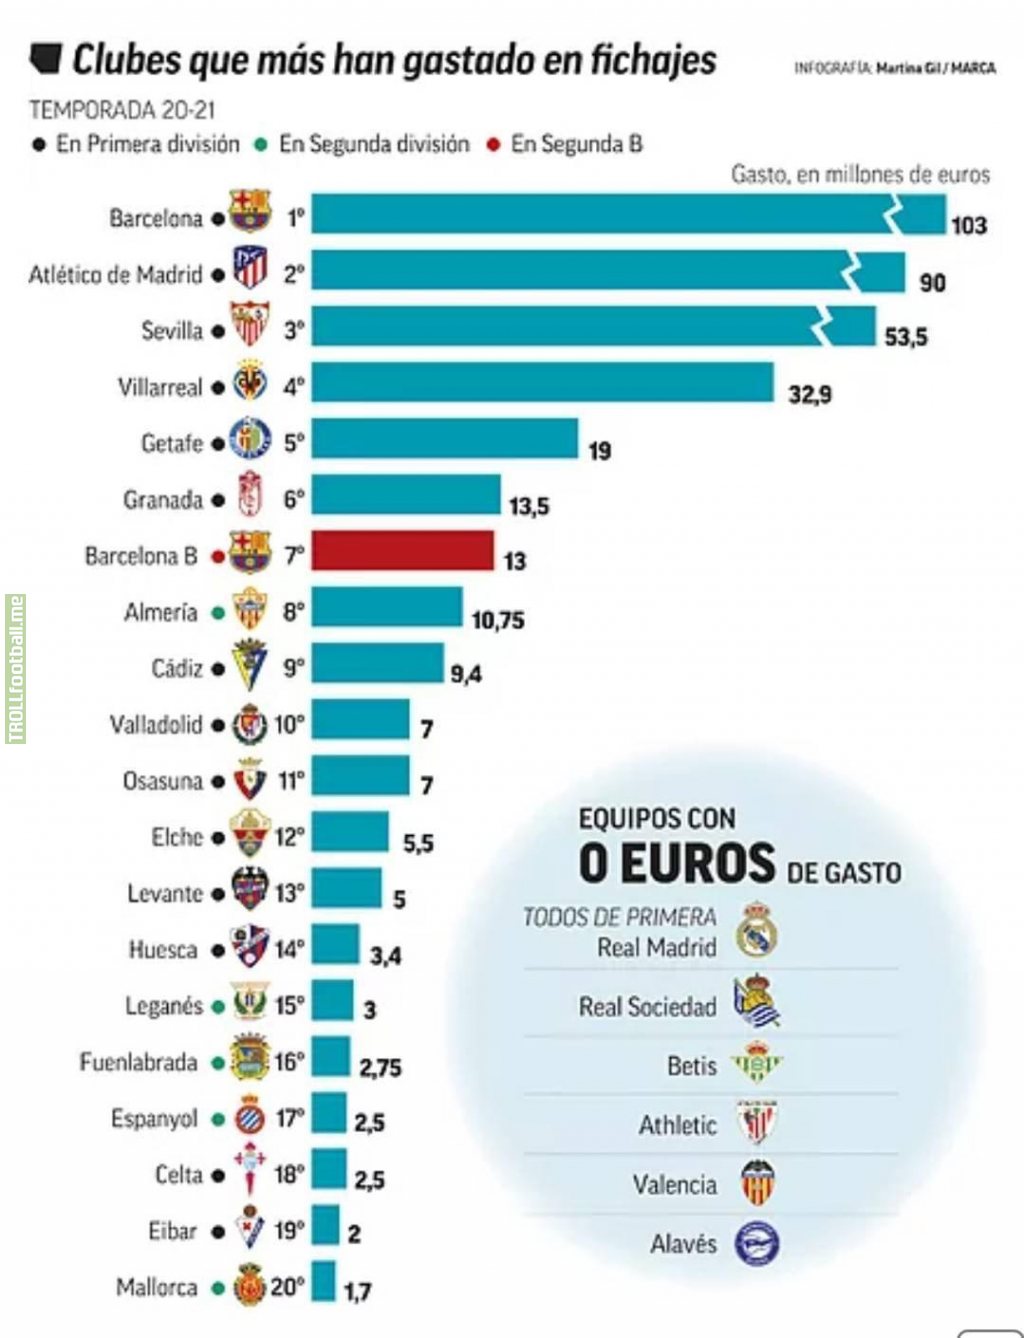 Barcelona B has spent more money on transfers than Real Madrid. According to MARCA this is the amount of money most spent on transfers in Spain this season.